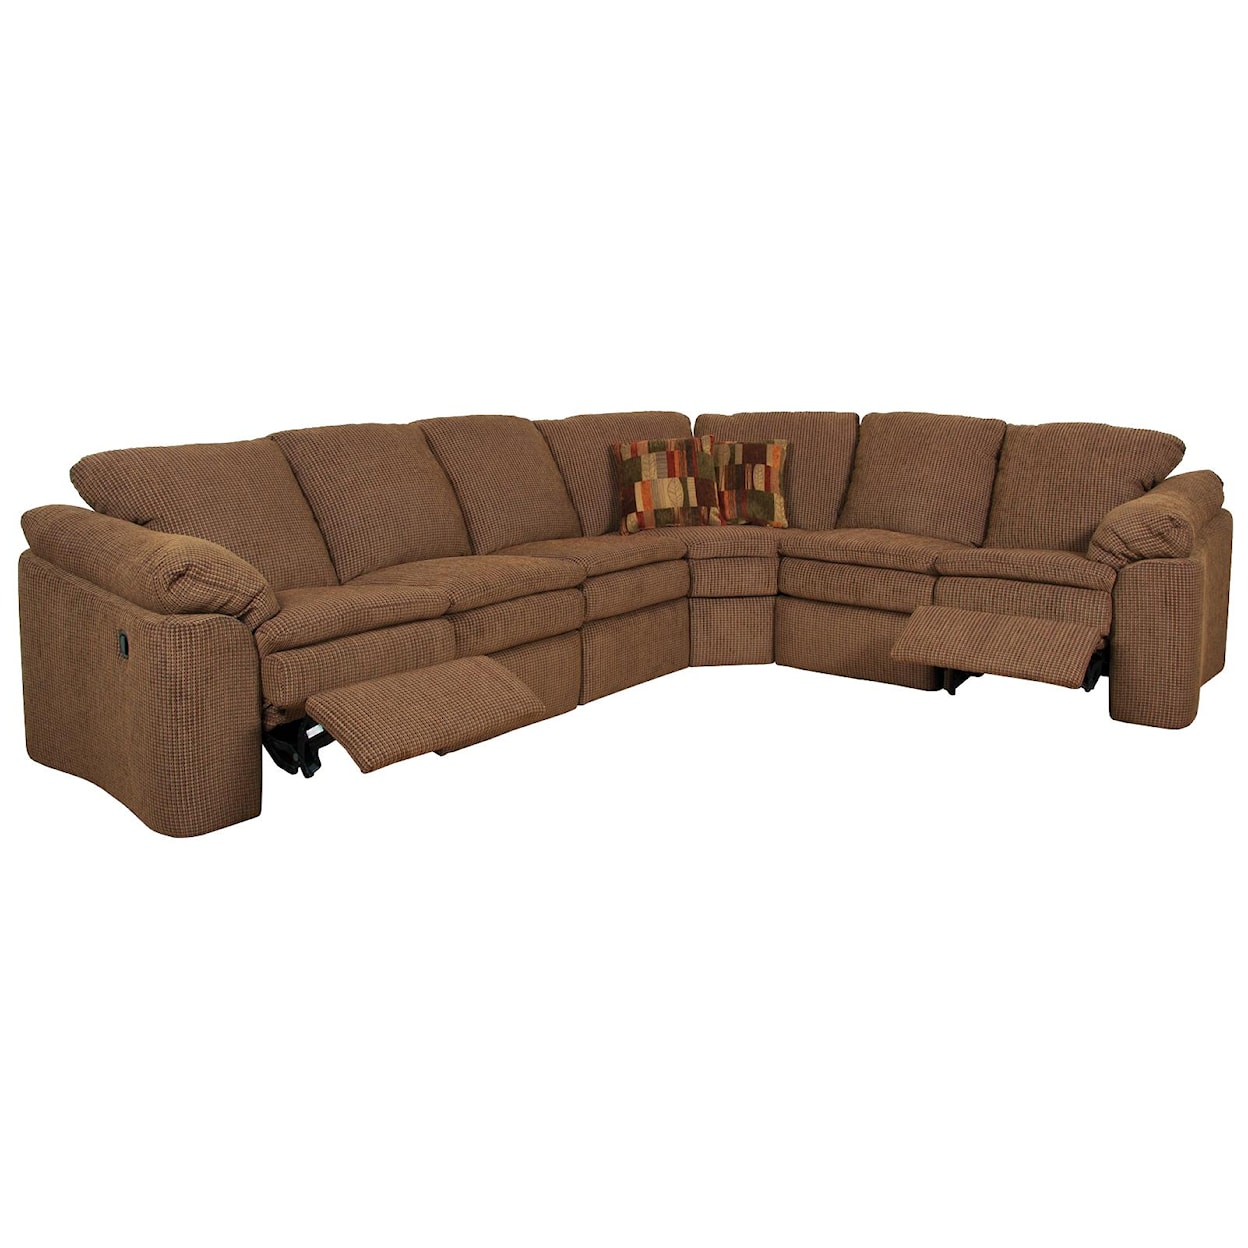 Dimensions 7300/L Series Six Person Reclining Sectional Sofa